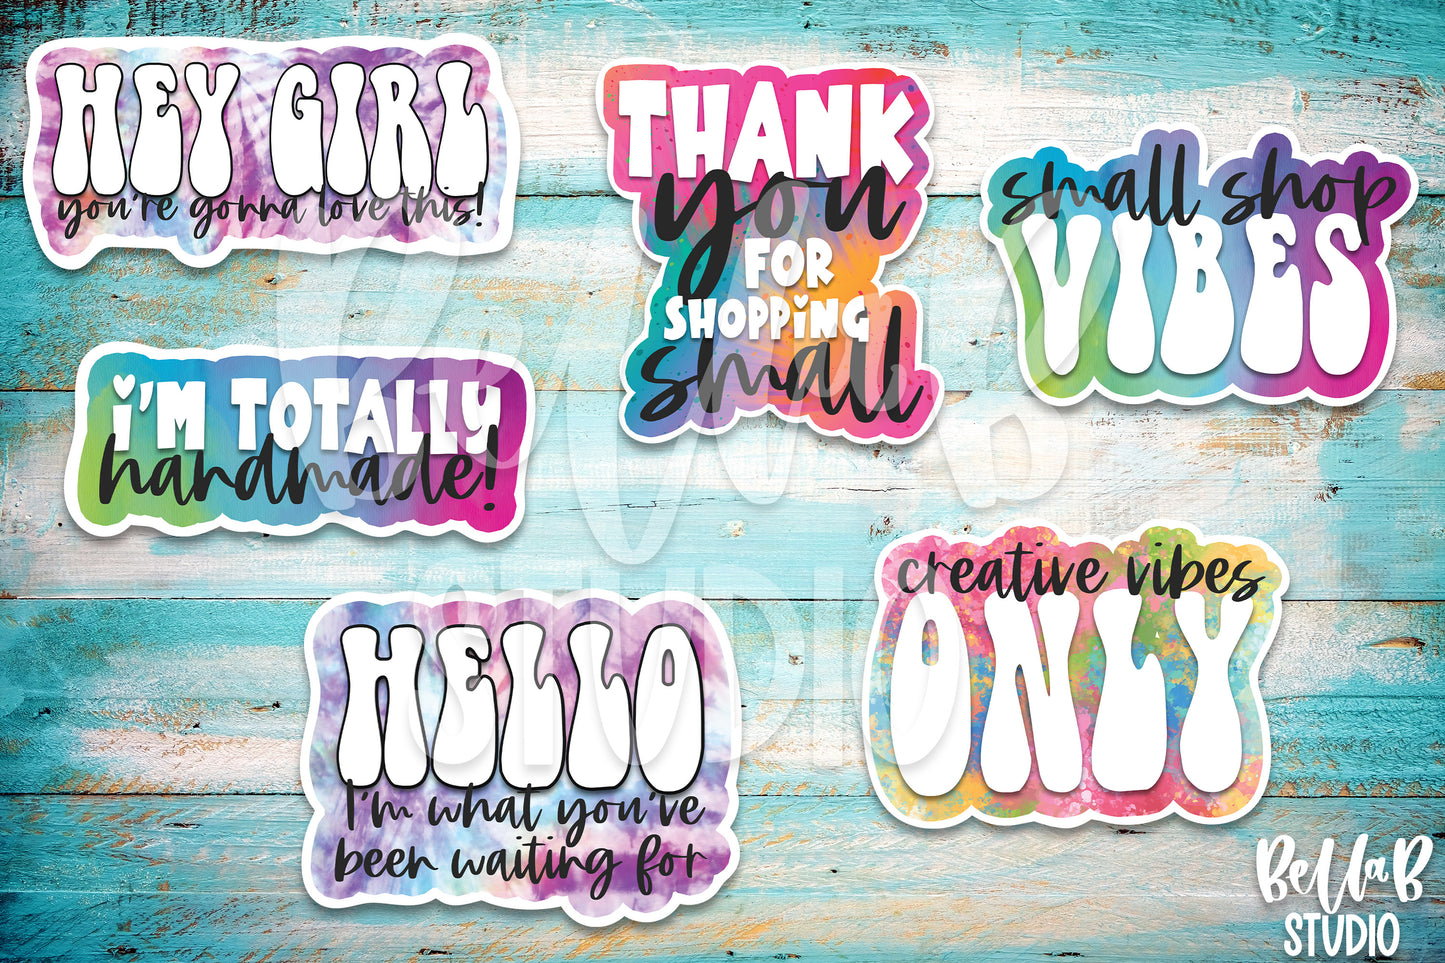 Retro Tie Dye Stickers, Small Business Packaging Stickers